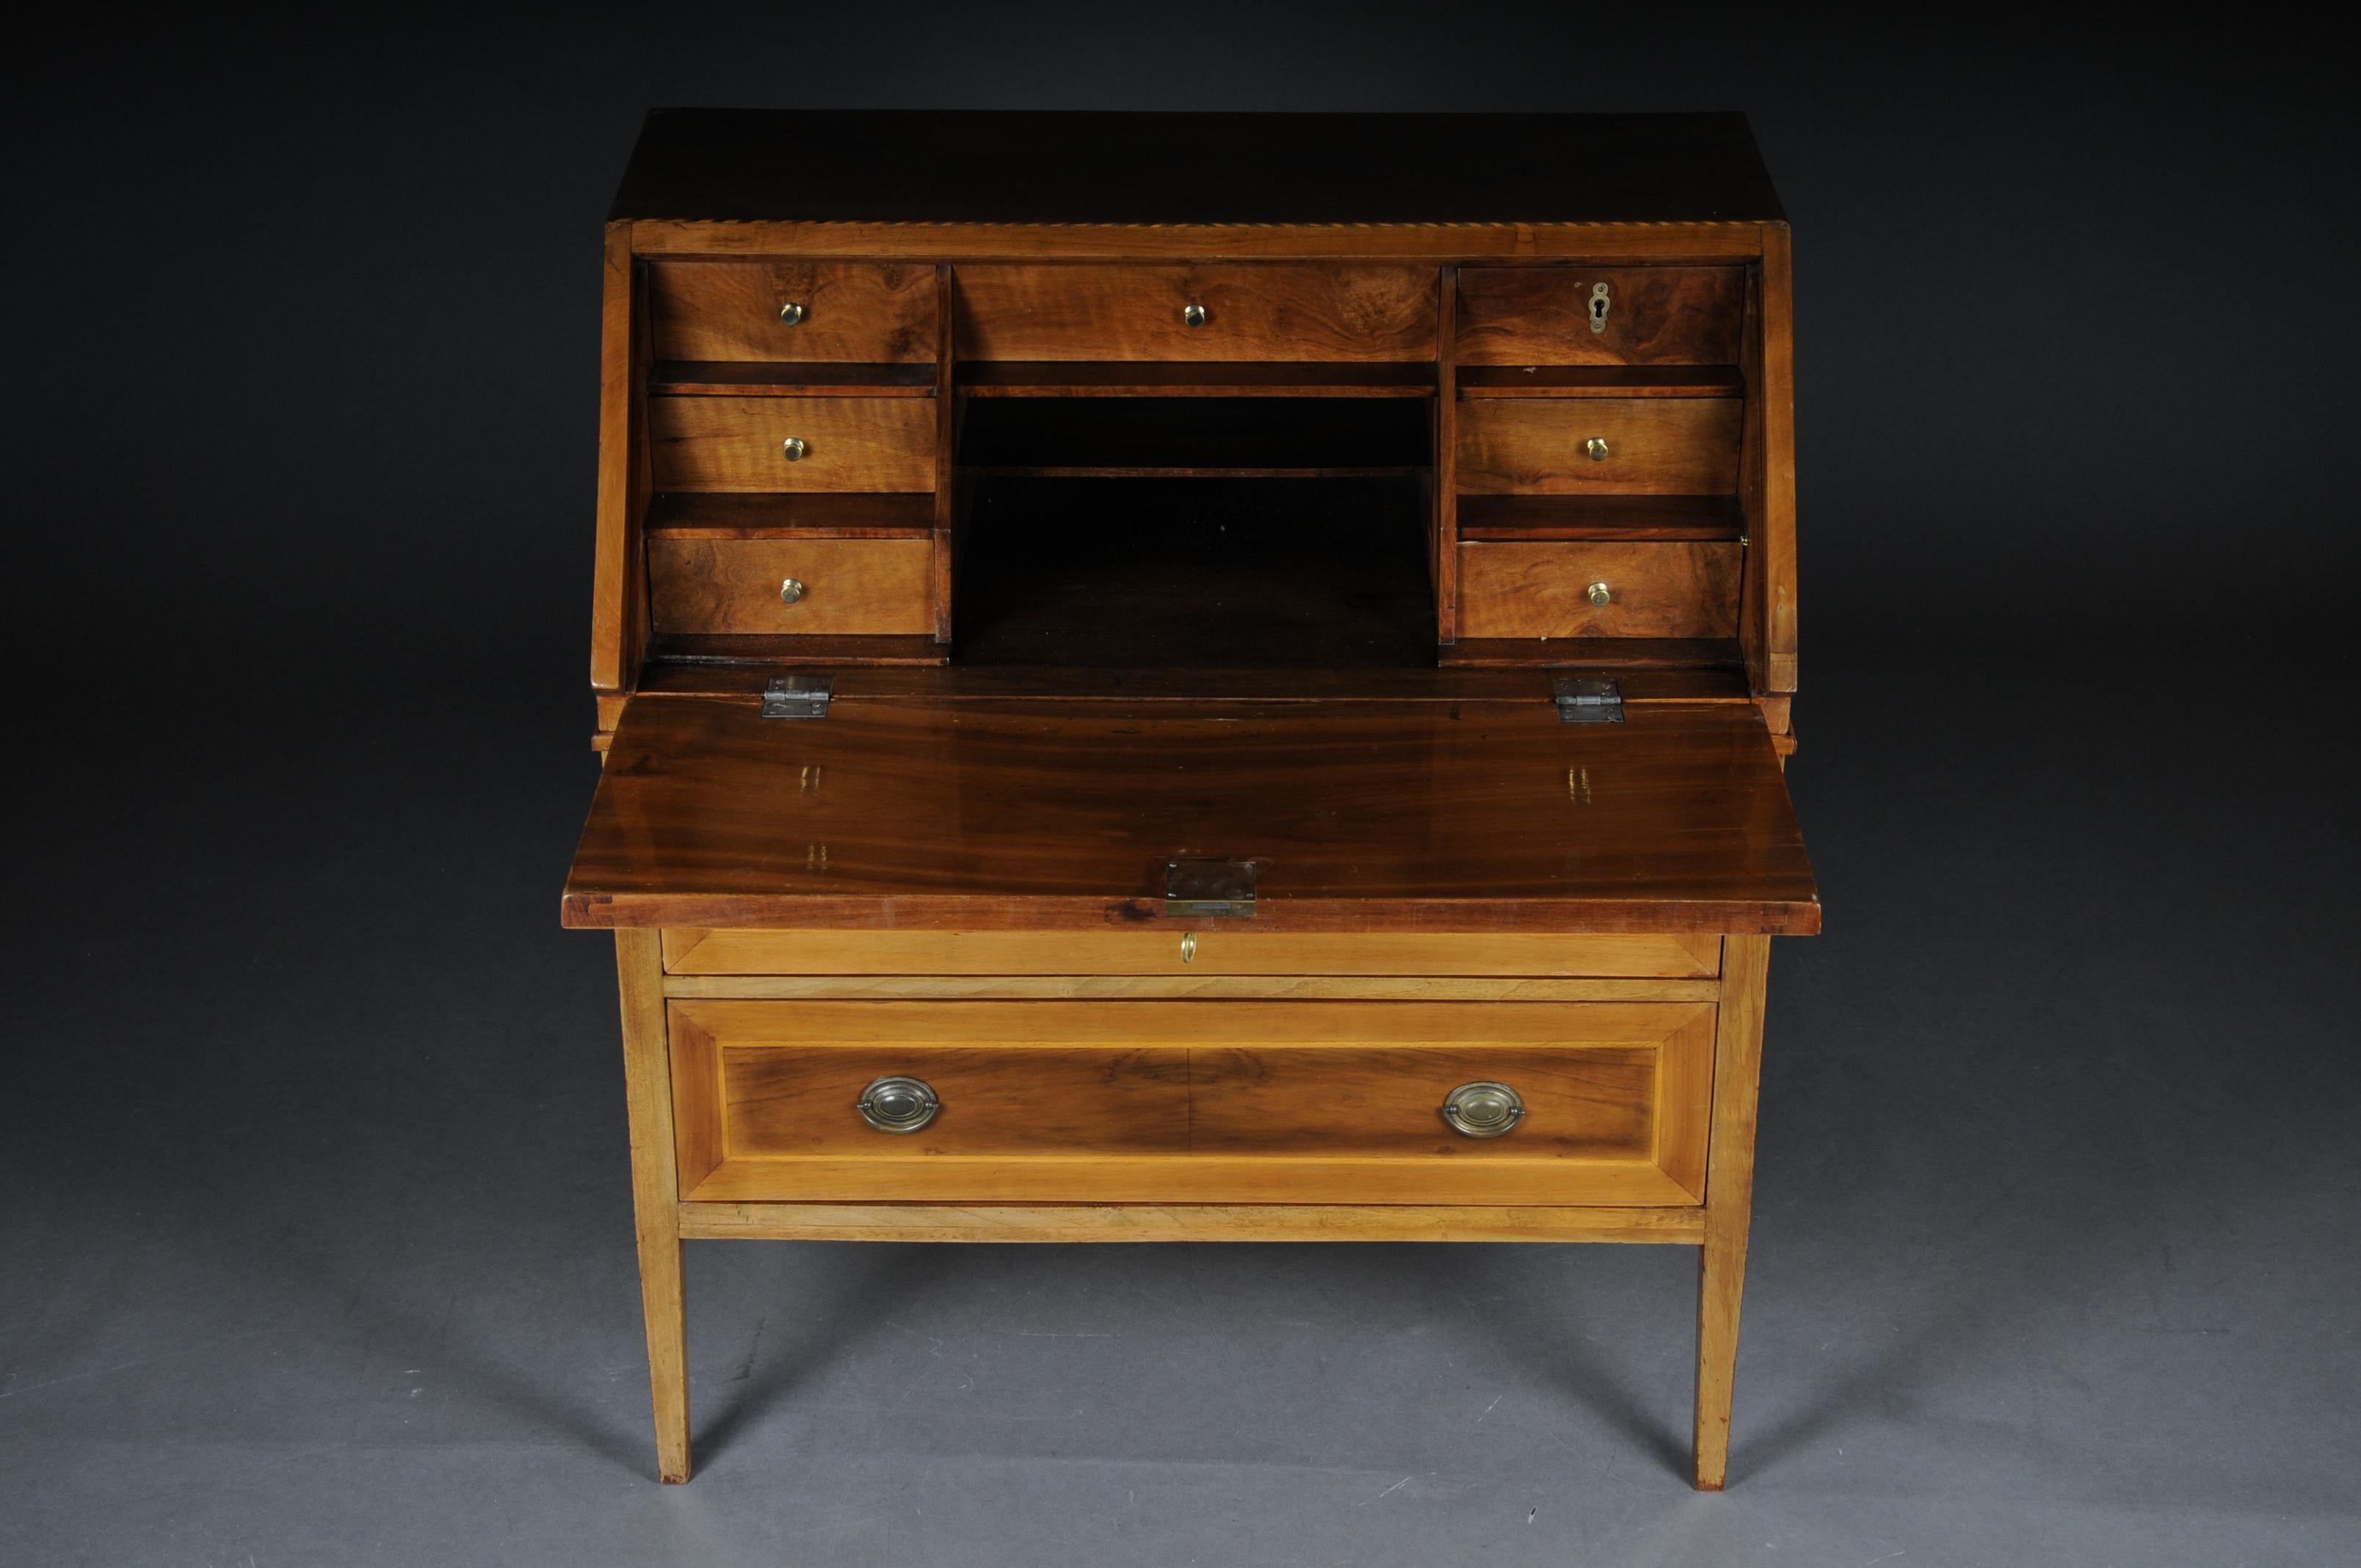 Classicist/Empire clapperboard secretary, circa 1790

Solid wood veneered with walnut. High-quality top on short tapered square legs, straight two-tier body, sloping writing flap above and staggered office division from drawers. Framed with thread